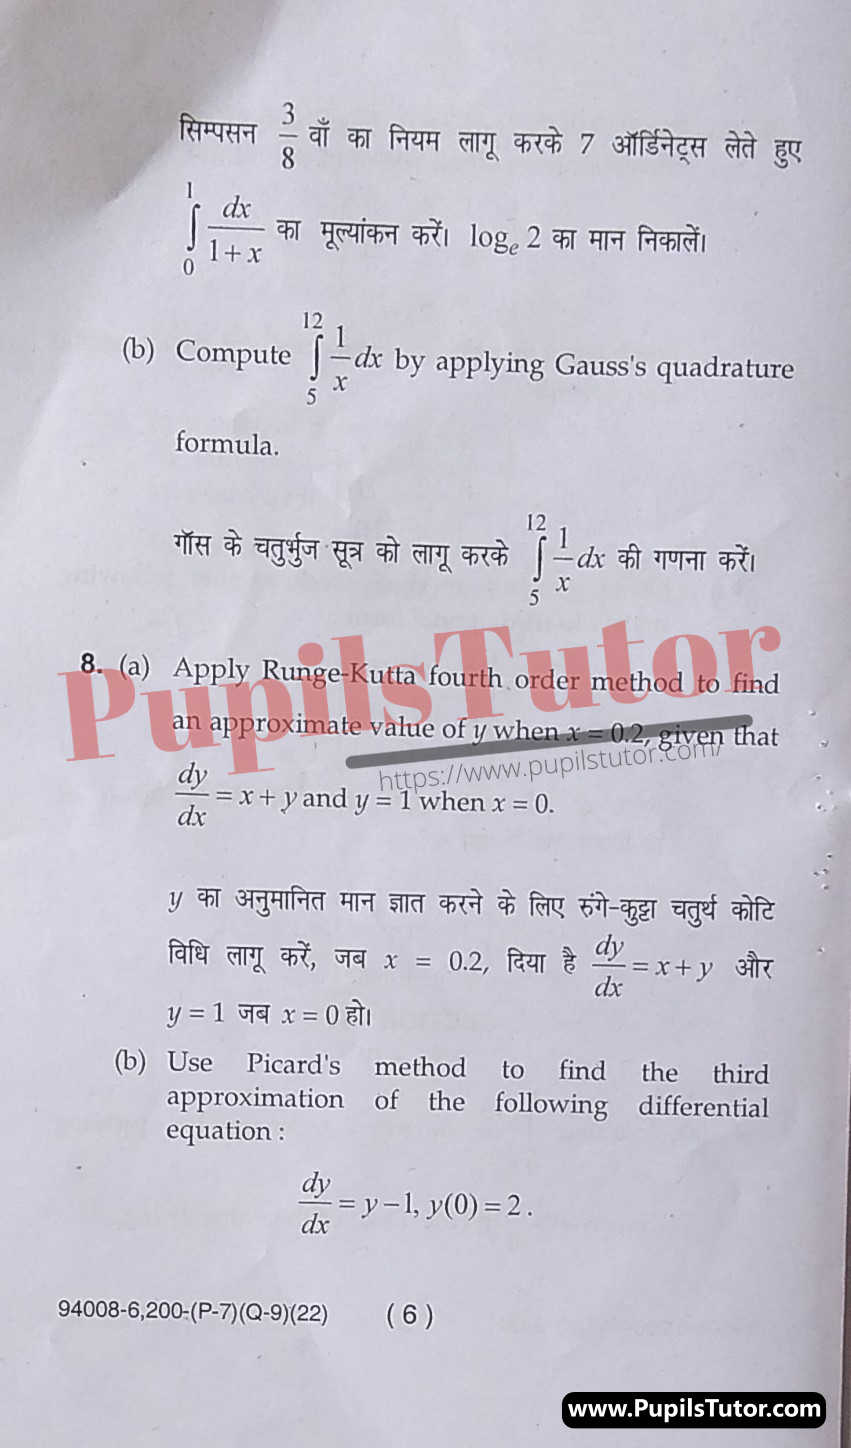 MDU (Maharshi Dayanand University, Rohtak Haryana) Pass Course (B.Sc. [Mathematics] 5th Sem) Numerical Analysis Question Paper Of February, 2022 Exam PDF Download Free (Page 6)